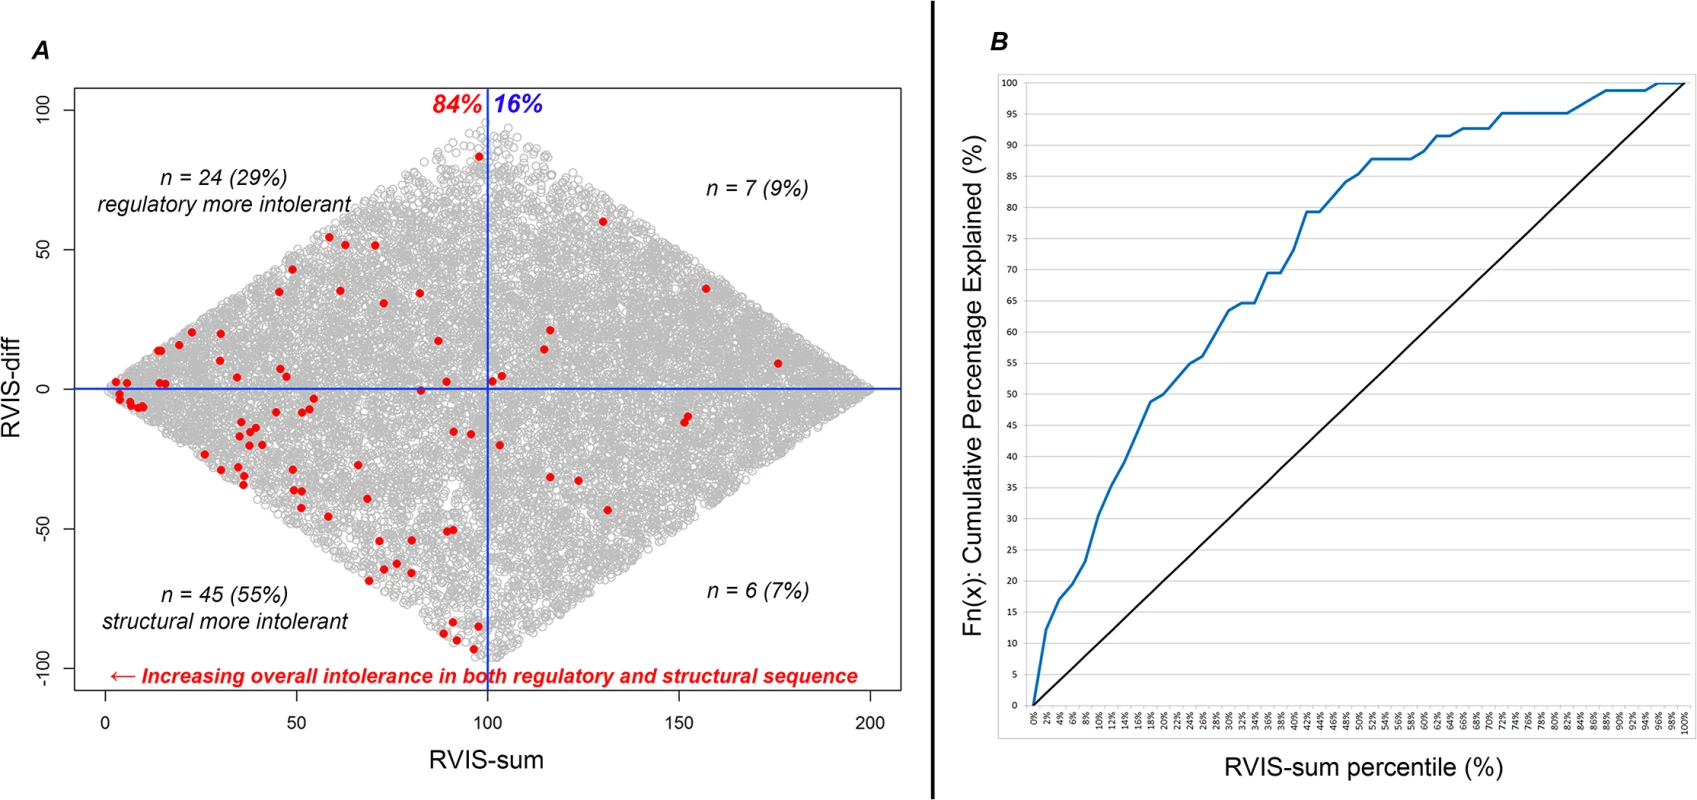 (A) Scatterplot of RVIS-sum (RVIS-CHGV + ncRVIS) and RVIS-diff (RVIS-CHGV–ncRVIS) scores. Each dot represents a gene. The grey dots represent the background genome-wide distribution. The red dots highlight the 82 OMIM haploinsufficiency genes with reported causal de novo mutations. A higher (positive Y-axis value) RVIS-diff score indicates genes where we might have a greater expectation of gene dosage aberrations being important compared with protein structure aberrations. A lower RVIS-sum (X-axis value) highlights genes that are increasingly intolerant in both their noncoding and protein-coding sequence. (B) A cumulative percentage plot for the RVIS-sum percentile accommodating the 82 OMIM halpoinsufficiency genes.